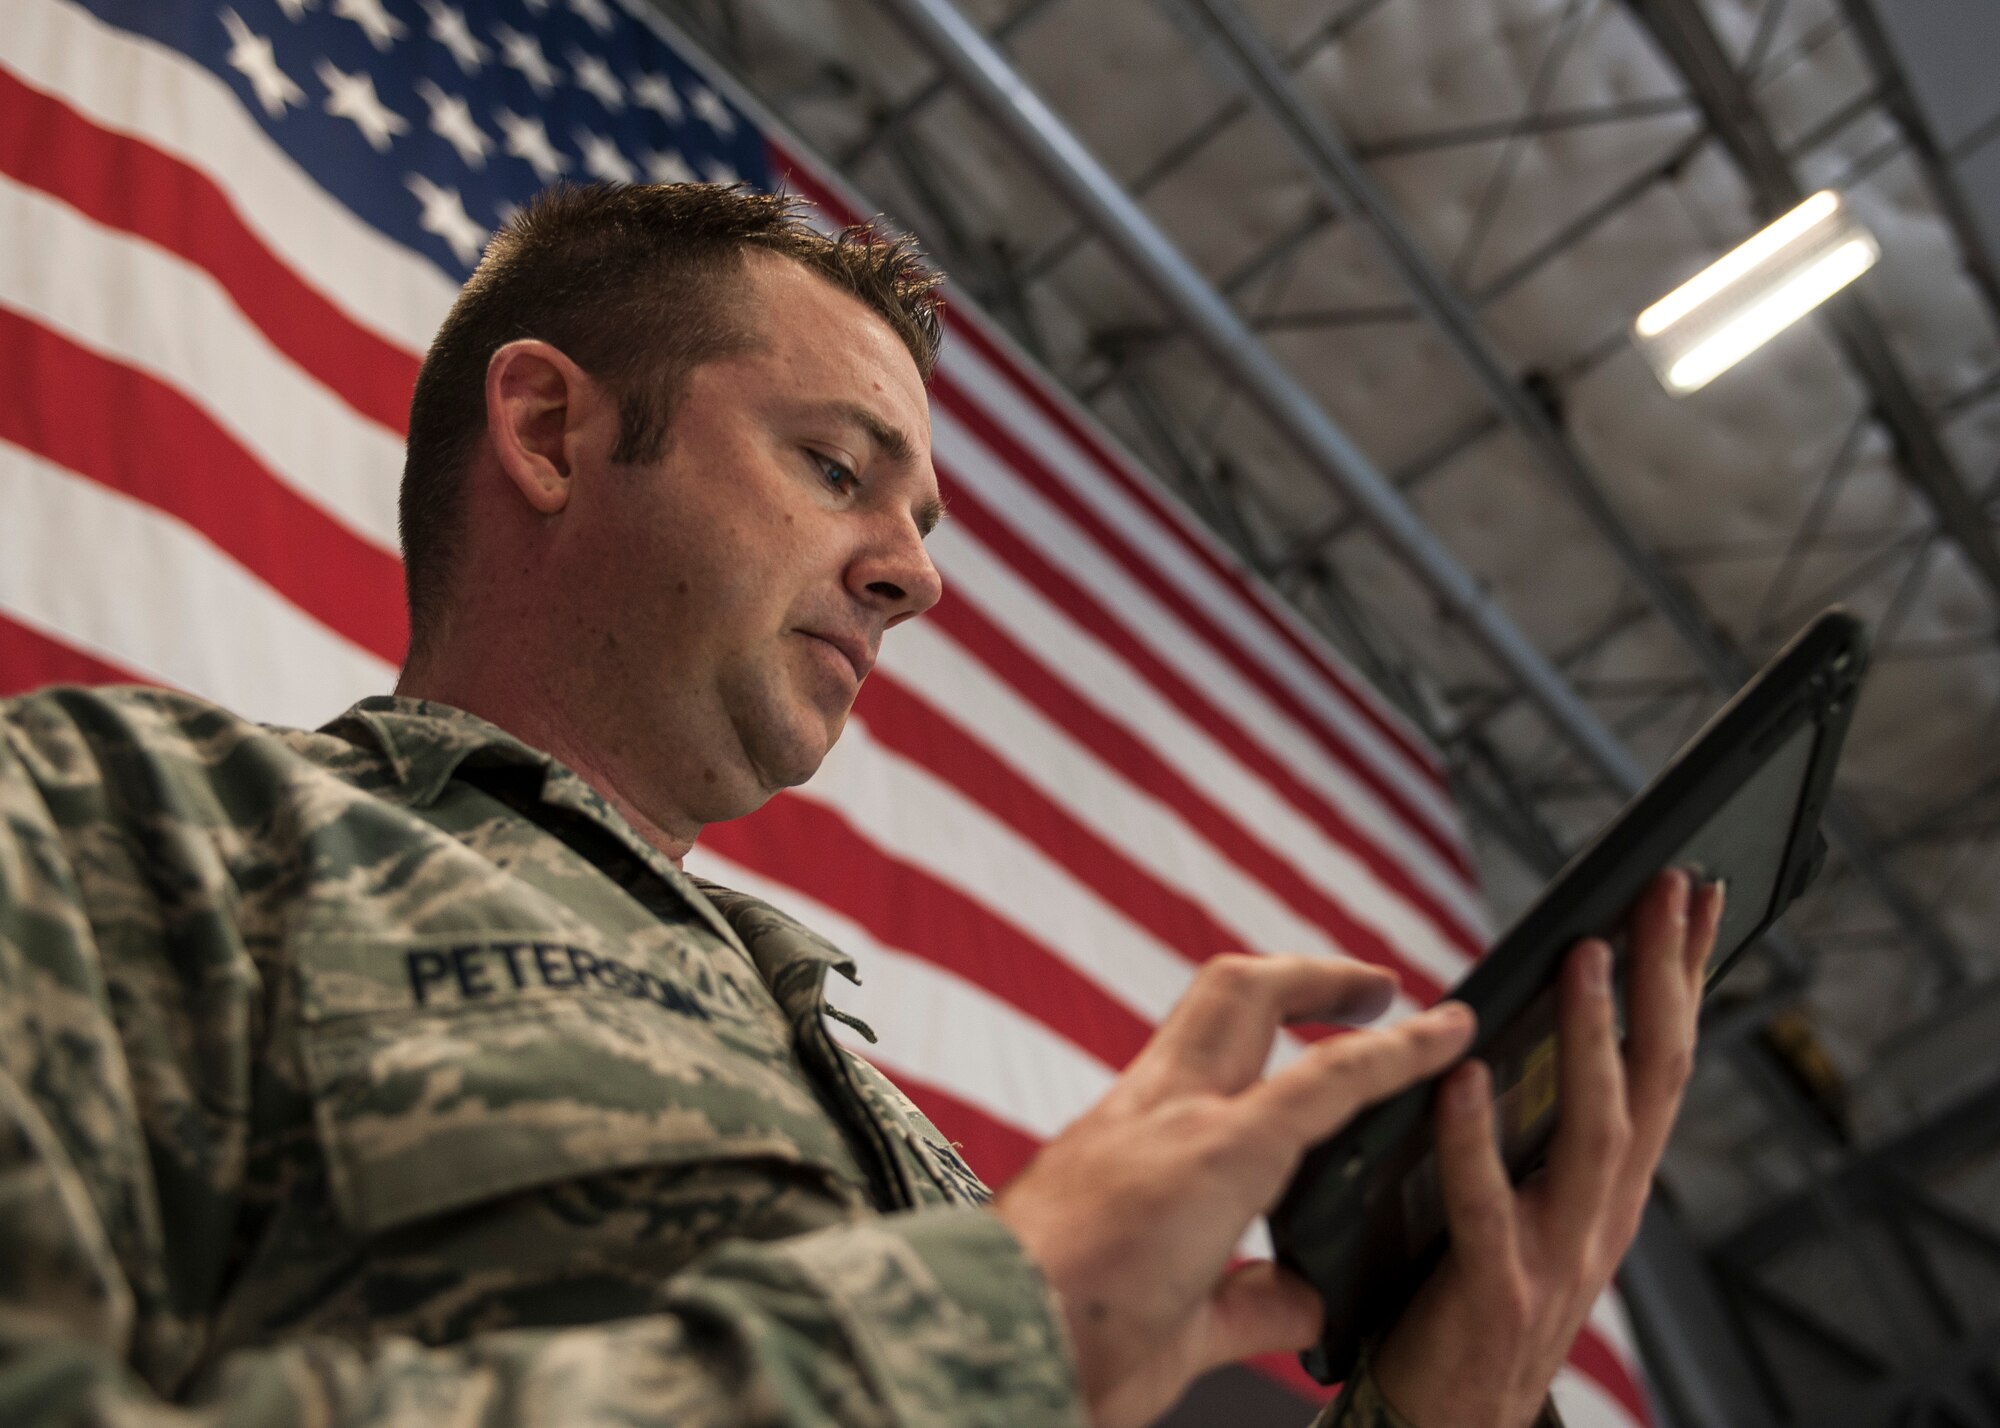 Staff Sgt. Brett Peterson, 823rd Maintenance Squadron engine troop, reviews a technical order at Nellis Air Force Base, Nev., Nov. 10, 2015. Technical orders provide Airmen all the information they need to accomplish a job safely and correctly. (U.S. Air Force photo by Staff Sgt. Siuta B. Ika)